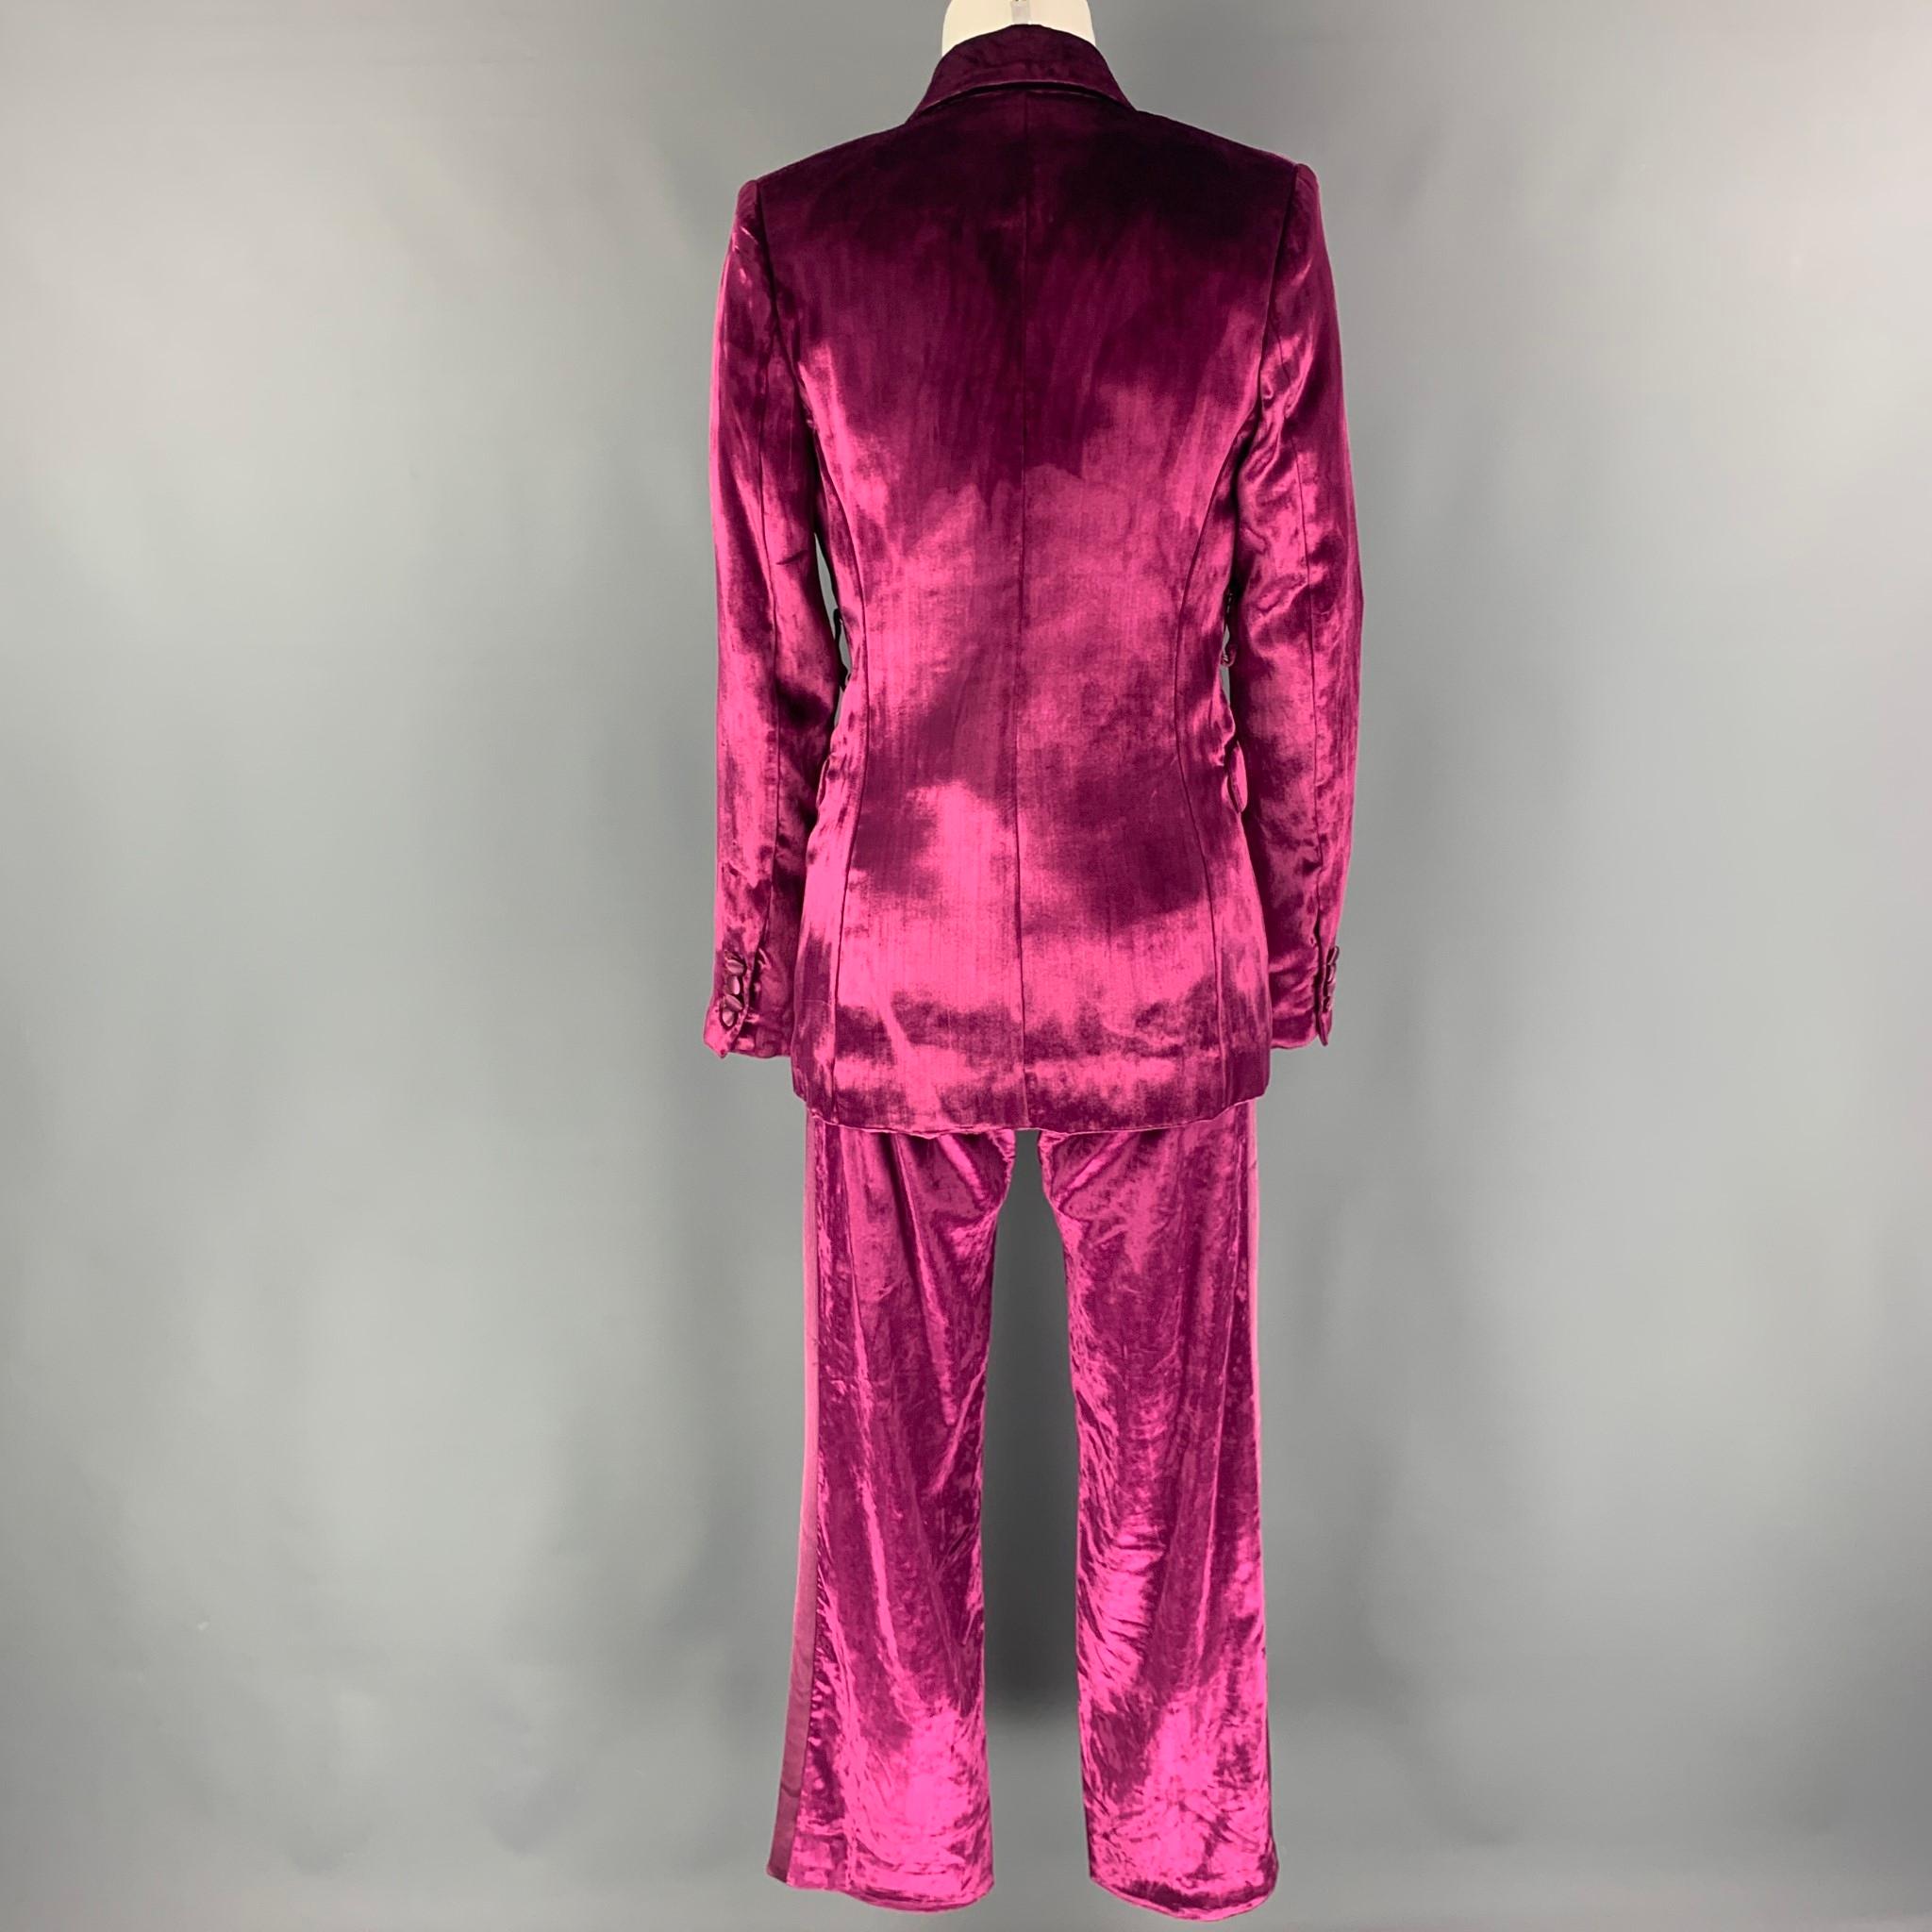 SIES MARJAN suit comes in a magenta velvet cotton / viscose with a full liner and includes a single breasted,  double button sport coat with a notch lapel and matching flat front trousers.

Excellent Pre-Owned Condition.
Marked: